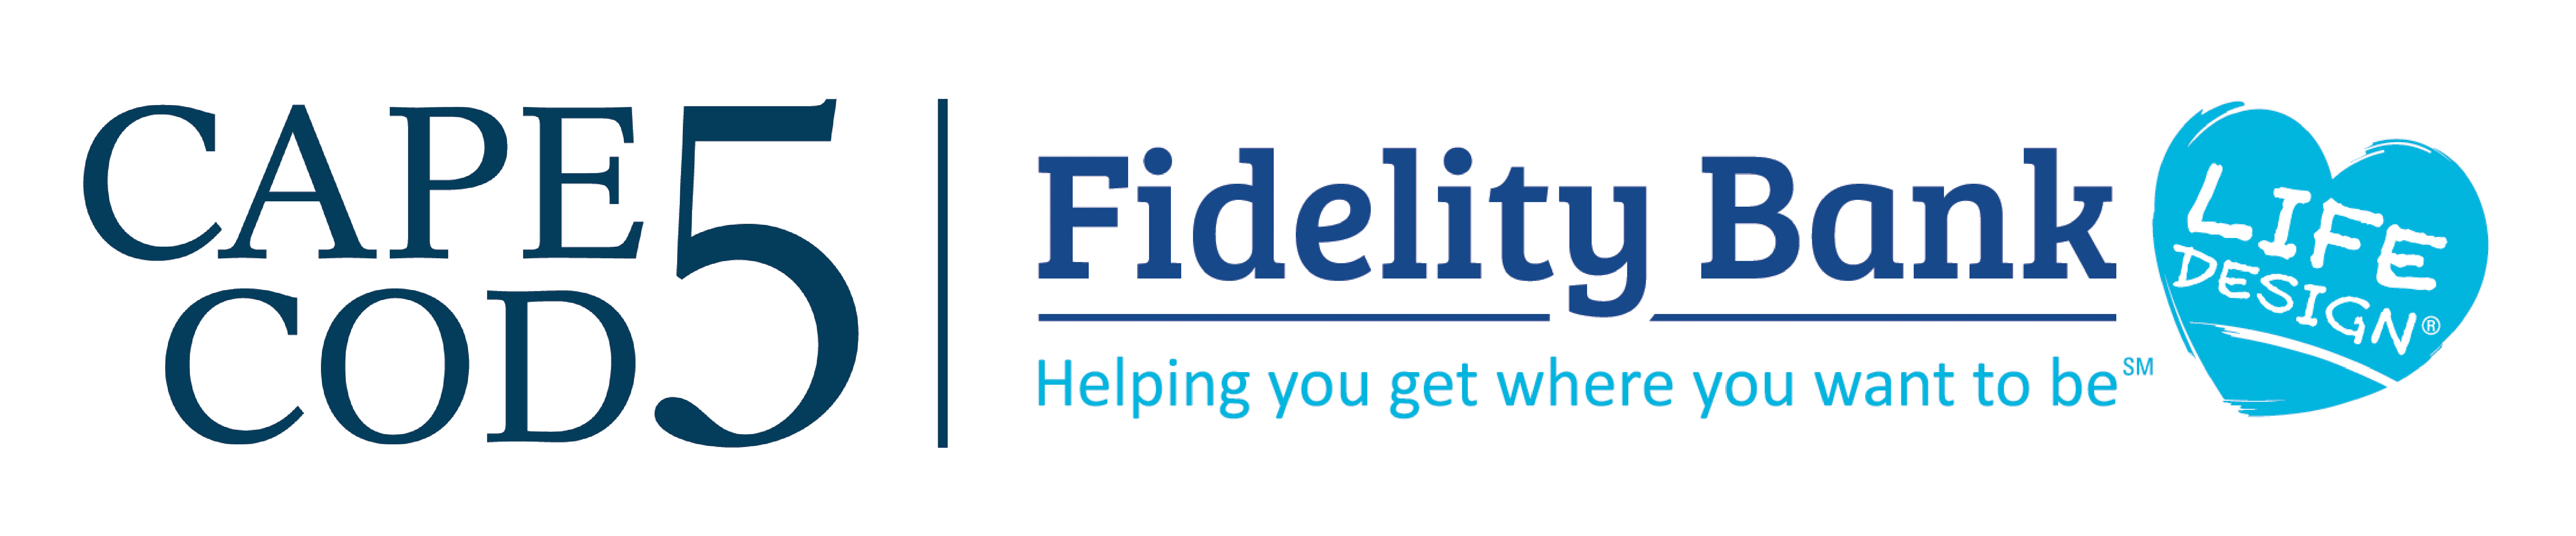 Cape Cod 5 and Fidelity Bank logos